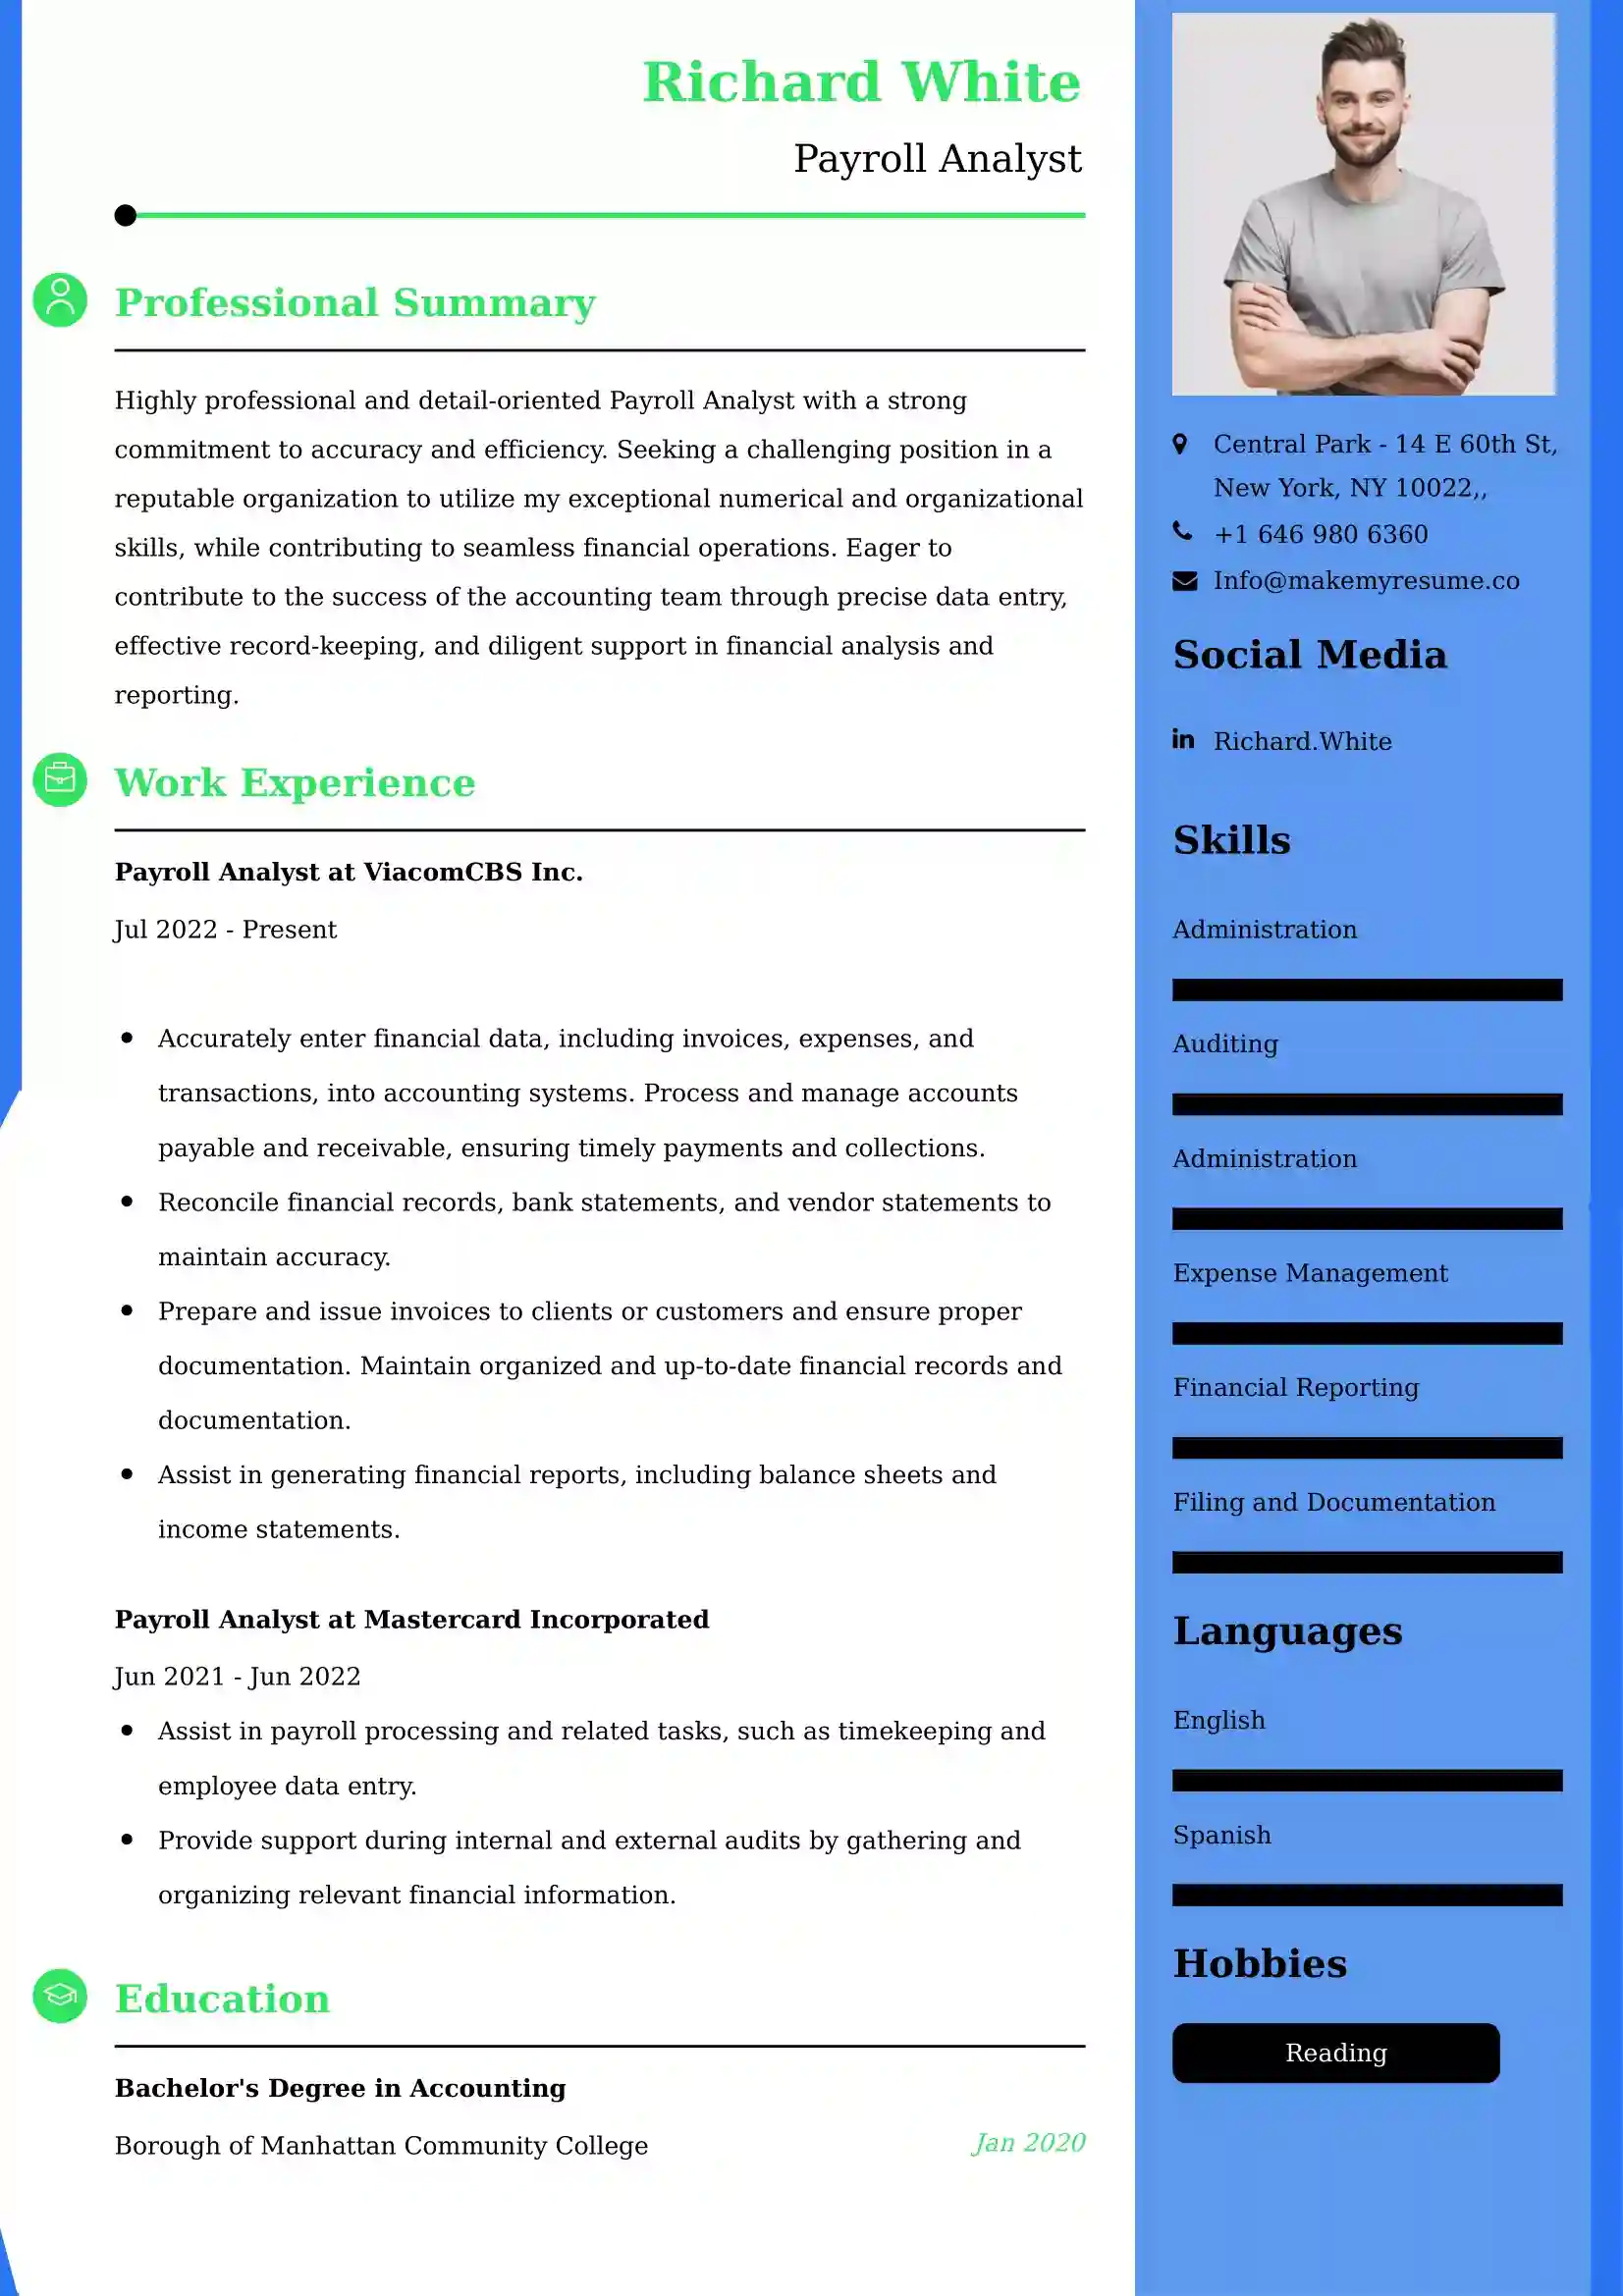 Payroll Analyst Resume Examples - Australian Format and Tips